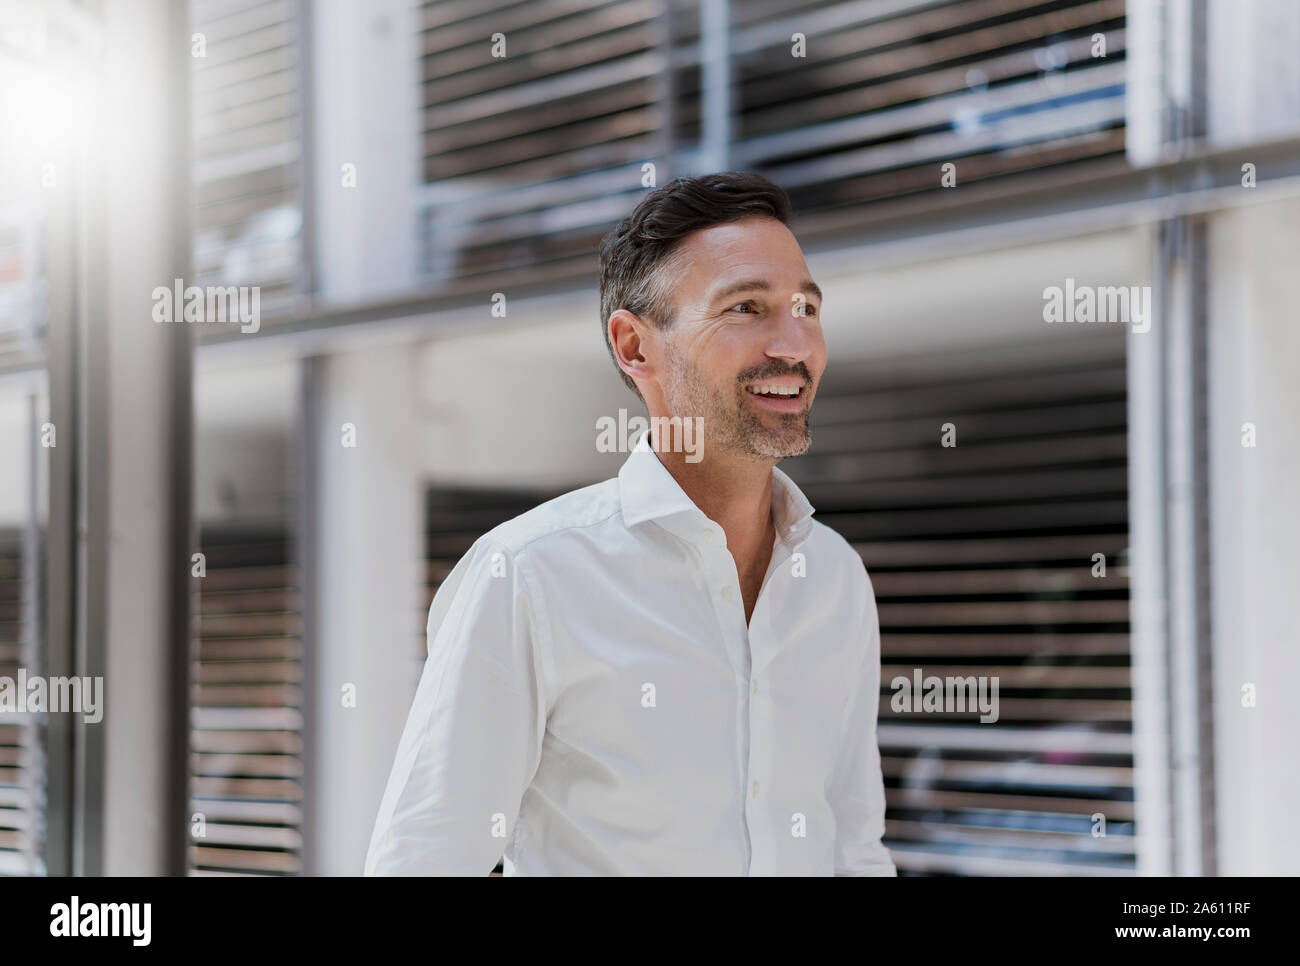 Smiling businessman at a car park wearing white shirt Stock Photo